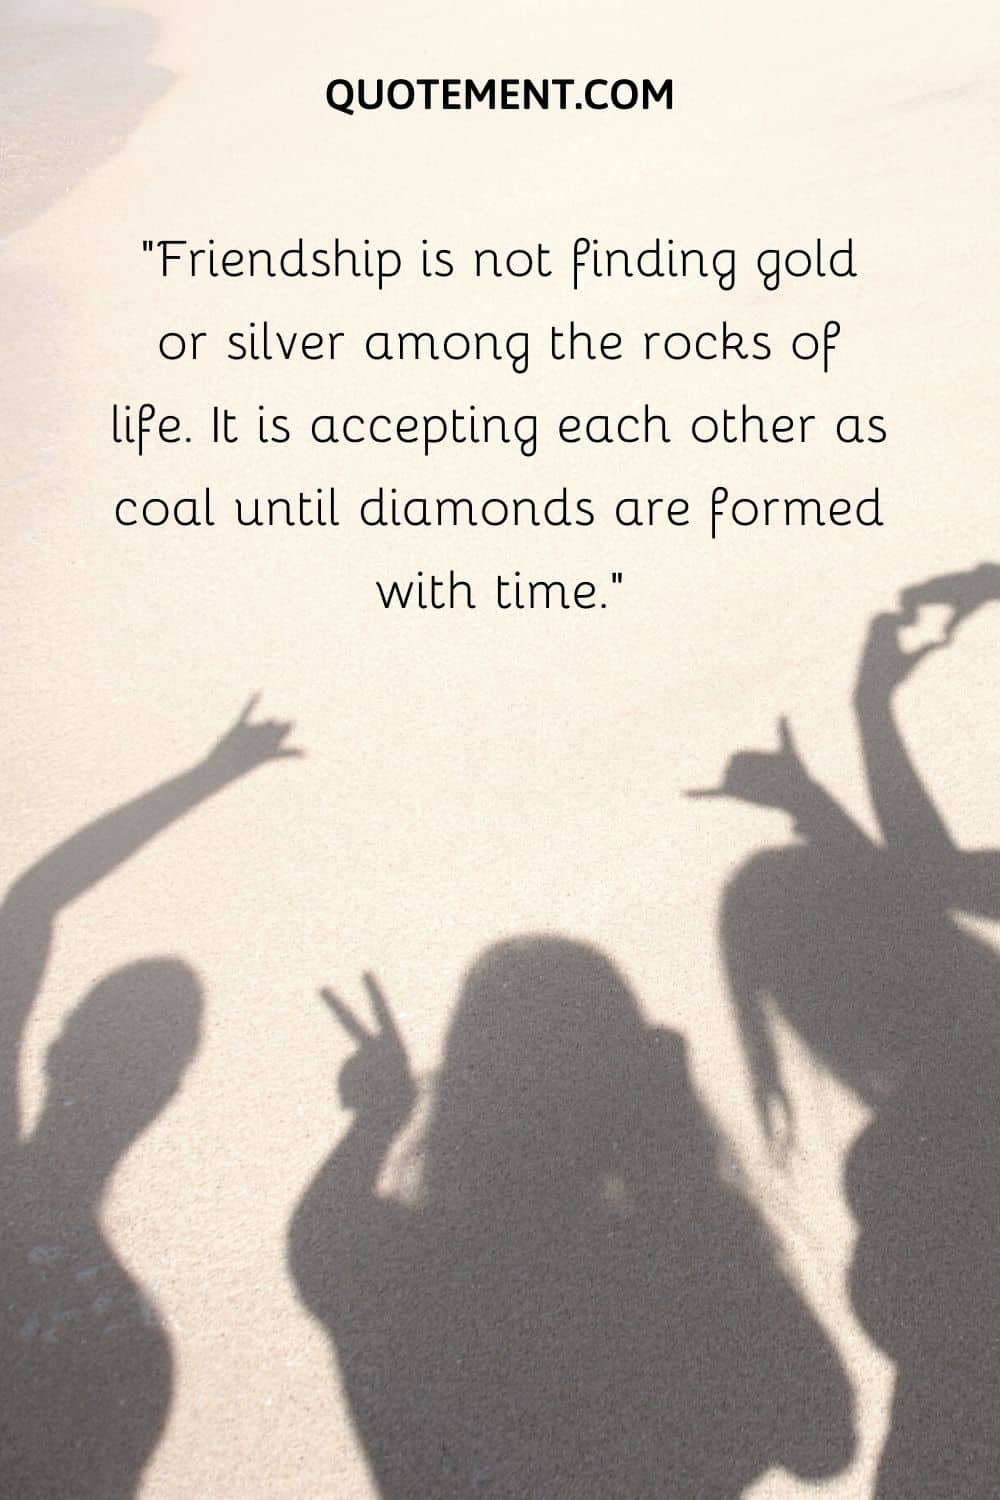 Friendship is not finding gold or silver among the rocks of life